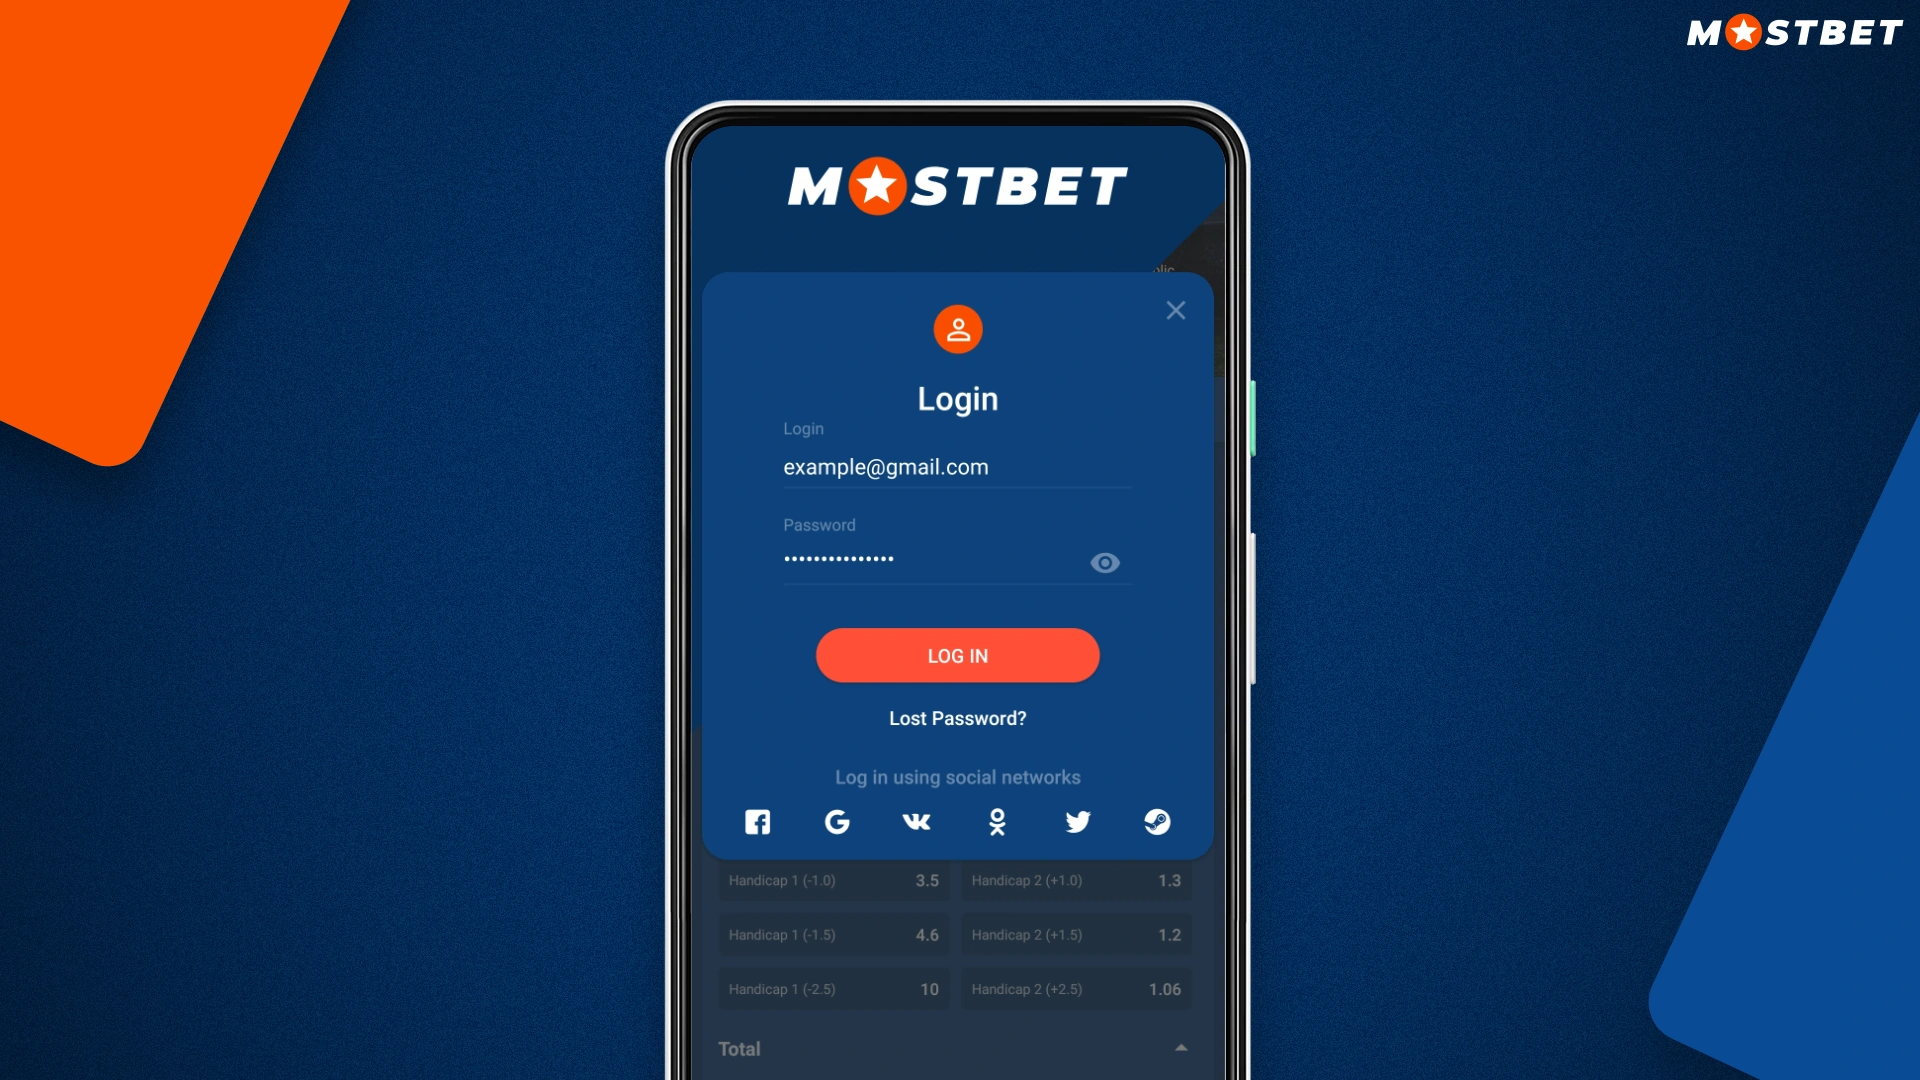 To log in to your account in the Mostbet app, you need to use the data that was specified during registration